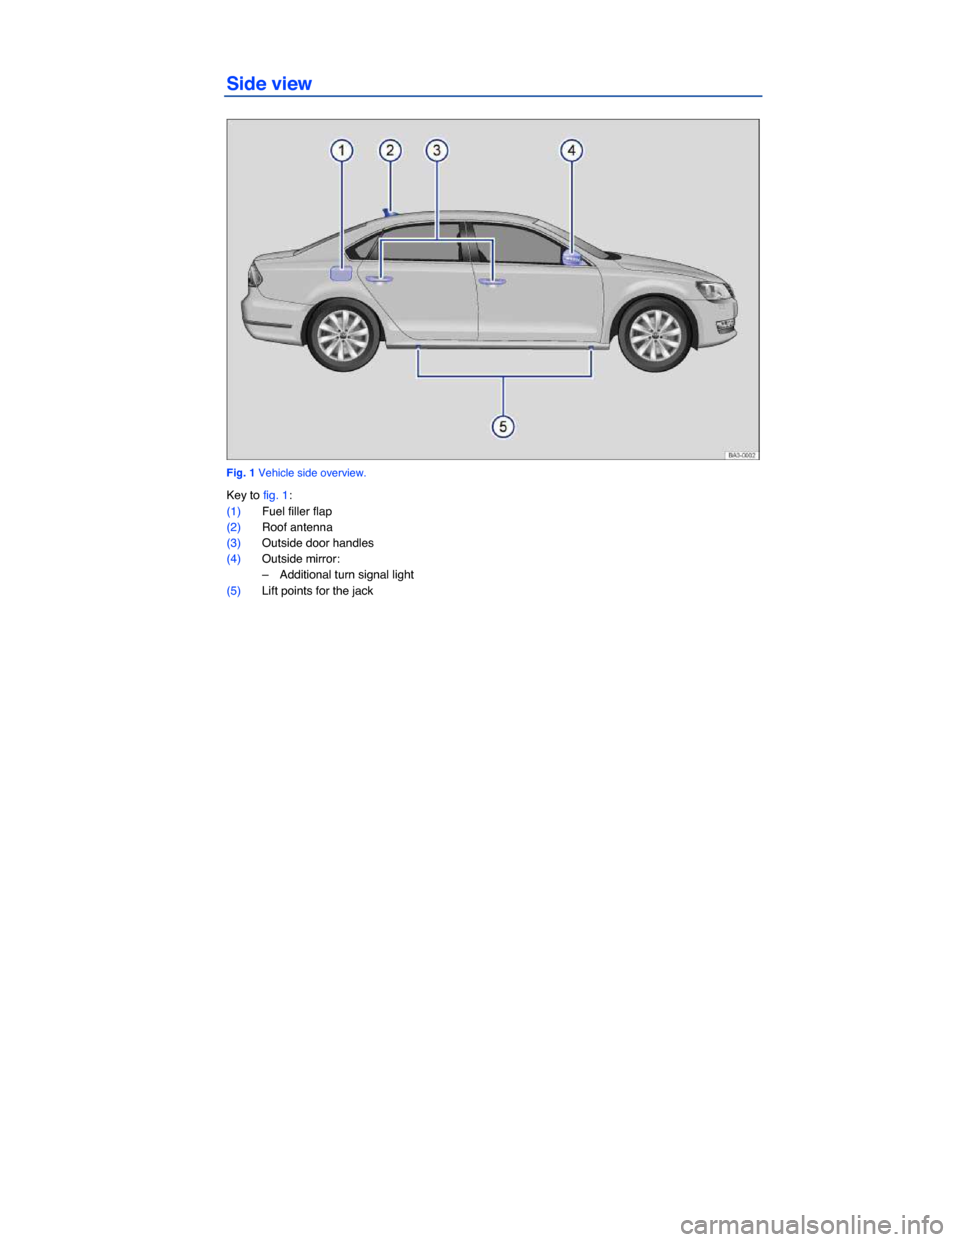 VOLKSWAGEN PASSAT 2015 B8 / 6.G User Guide  
Side view 
 
Fig. 1 Vehicle side overview. 
Key to fig. 1: 
(1) Fuel filler flap  
(2) Roof antenna  
(3) Outside door handles  
(4) Outside mirror:  
–  Additional turn signal light  
(5) Lift po